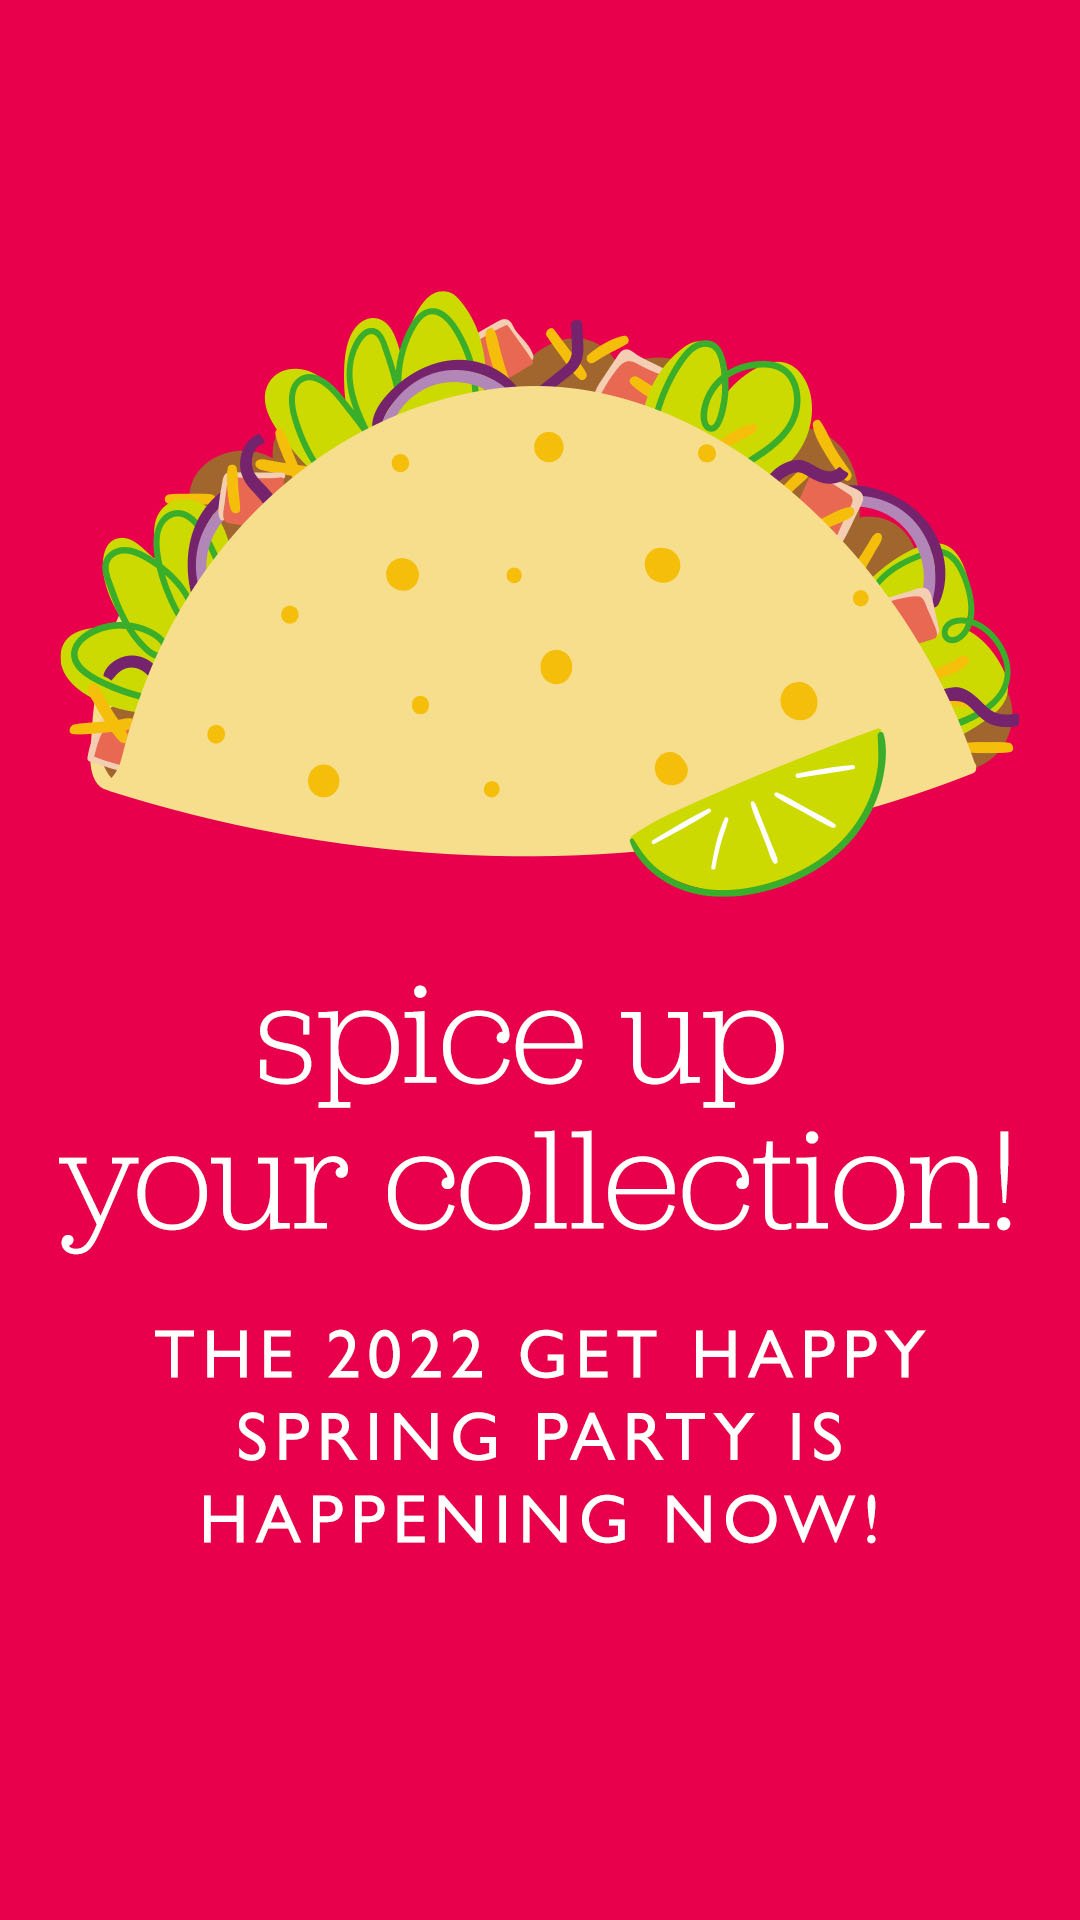 2022 - CAM - HEV_Organic Social_Story_Get Happy Spring Party Campaign_Promotion Details & Party Dates_Graphic 4_Evergreen.jpg